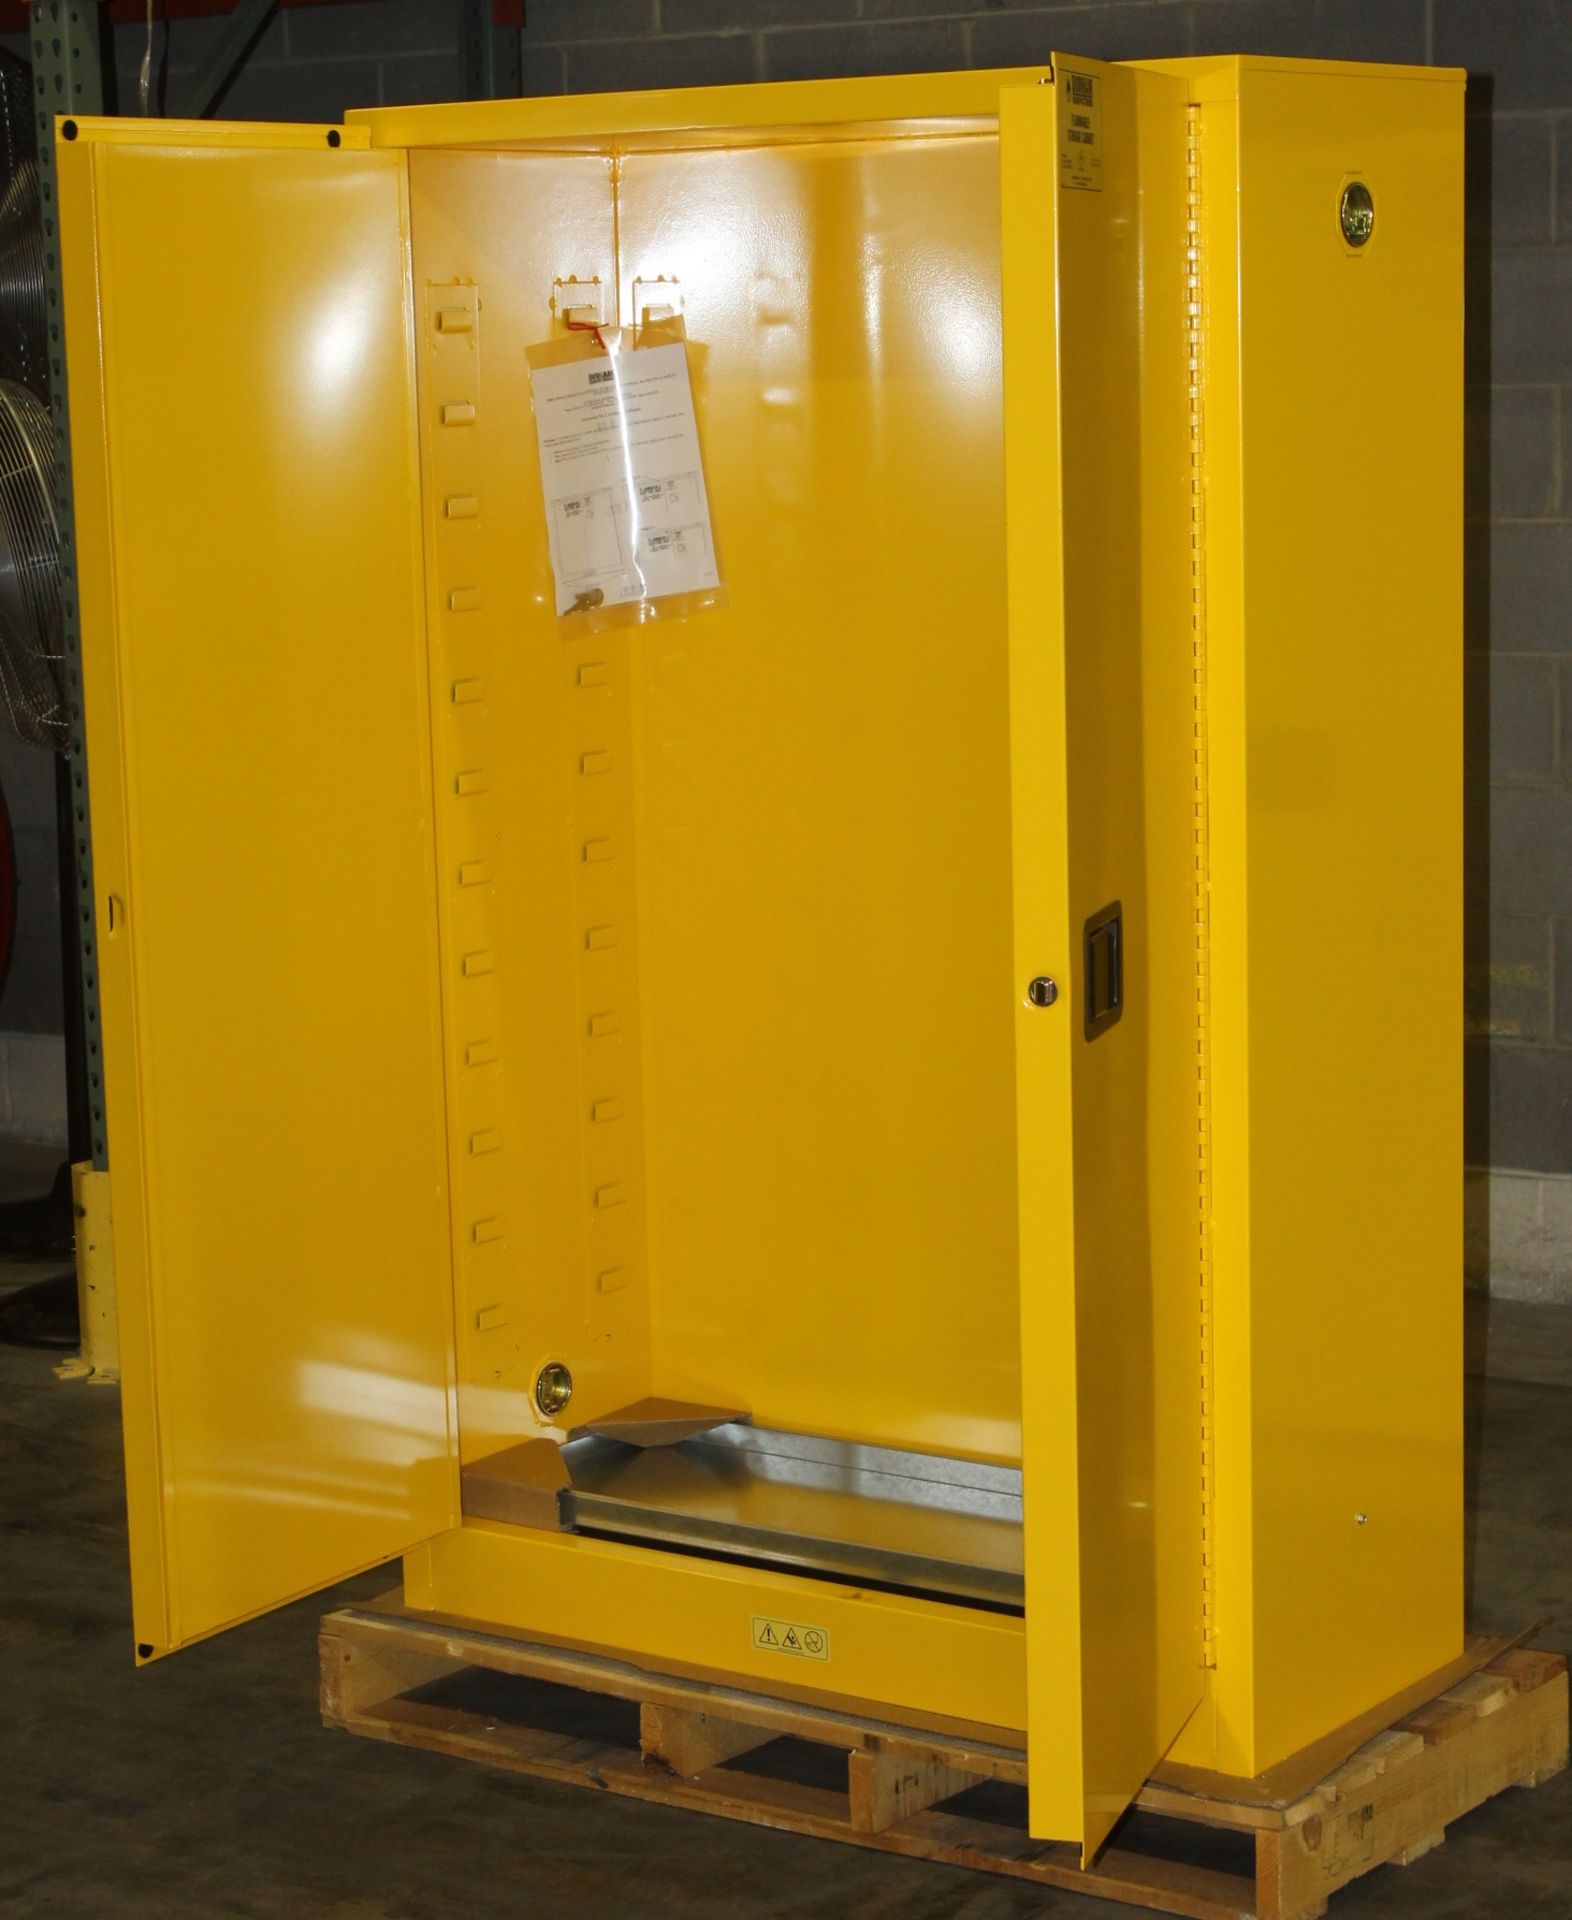 45 GALLONS FLAMMABLE SAFETY STORAGE CABINET,  NEW NEVER USED MODEL: 1045M-50, 2 SHELVES, 45 - Image 4 of 4